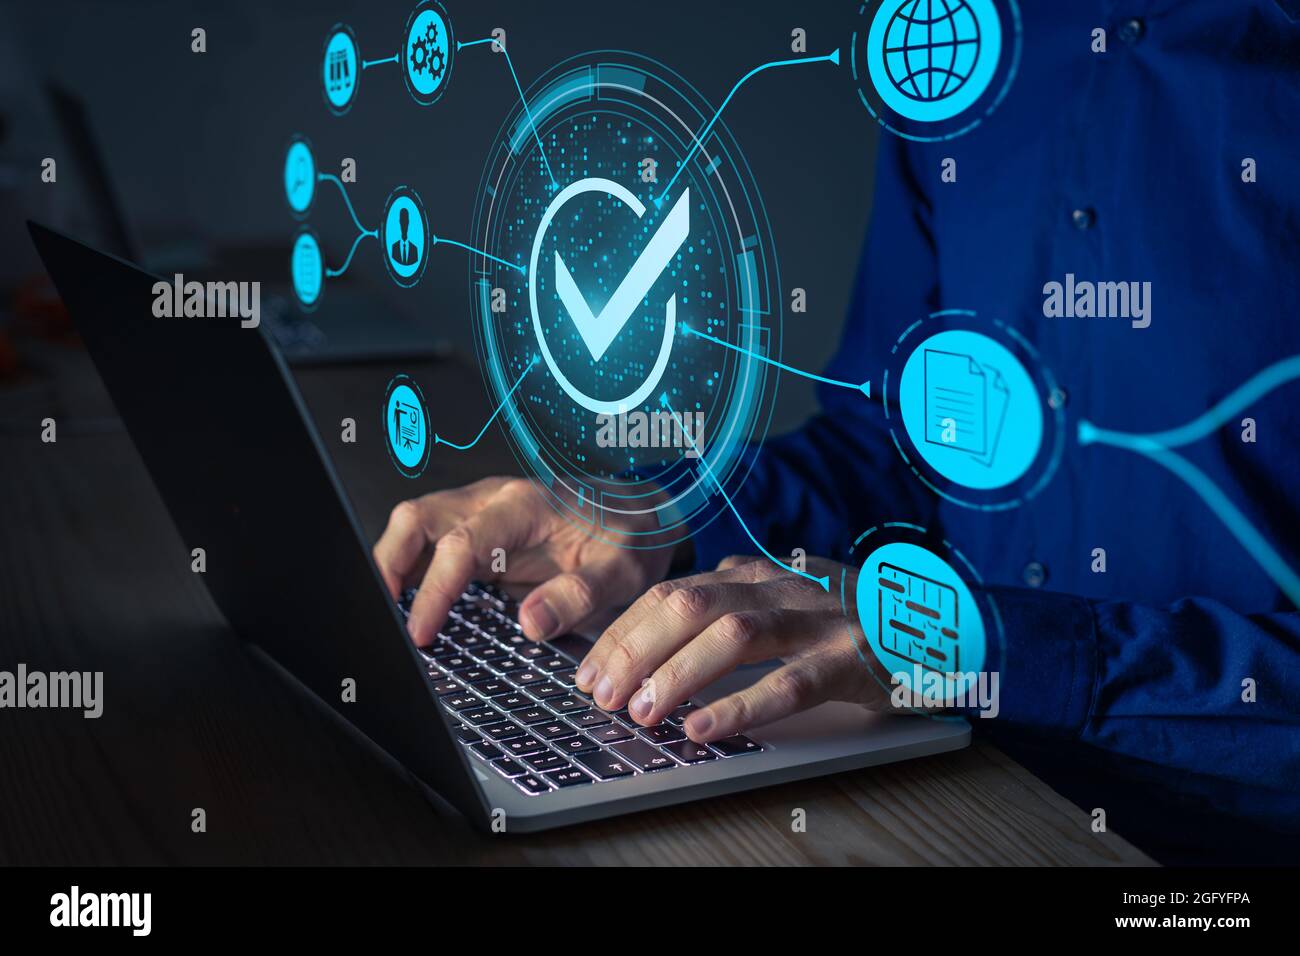 Quality Assurance and certification. Certified internet businesses and services. Compliance to international standards and regulations. Concept with c Stock Photo